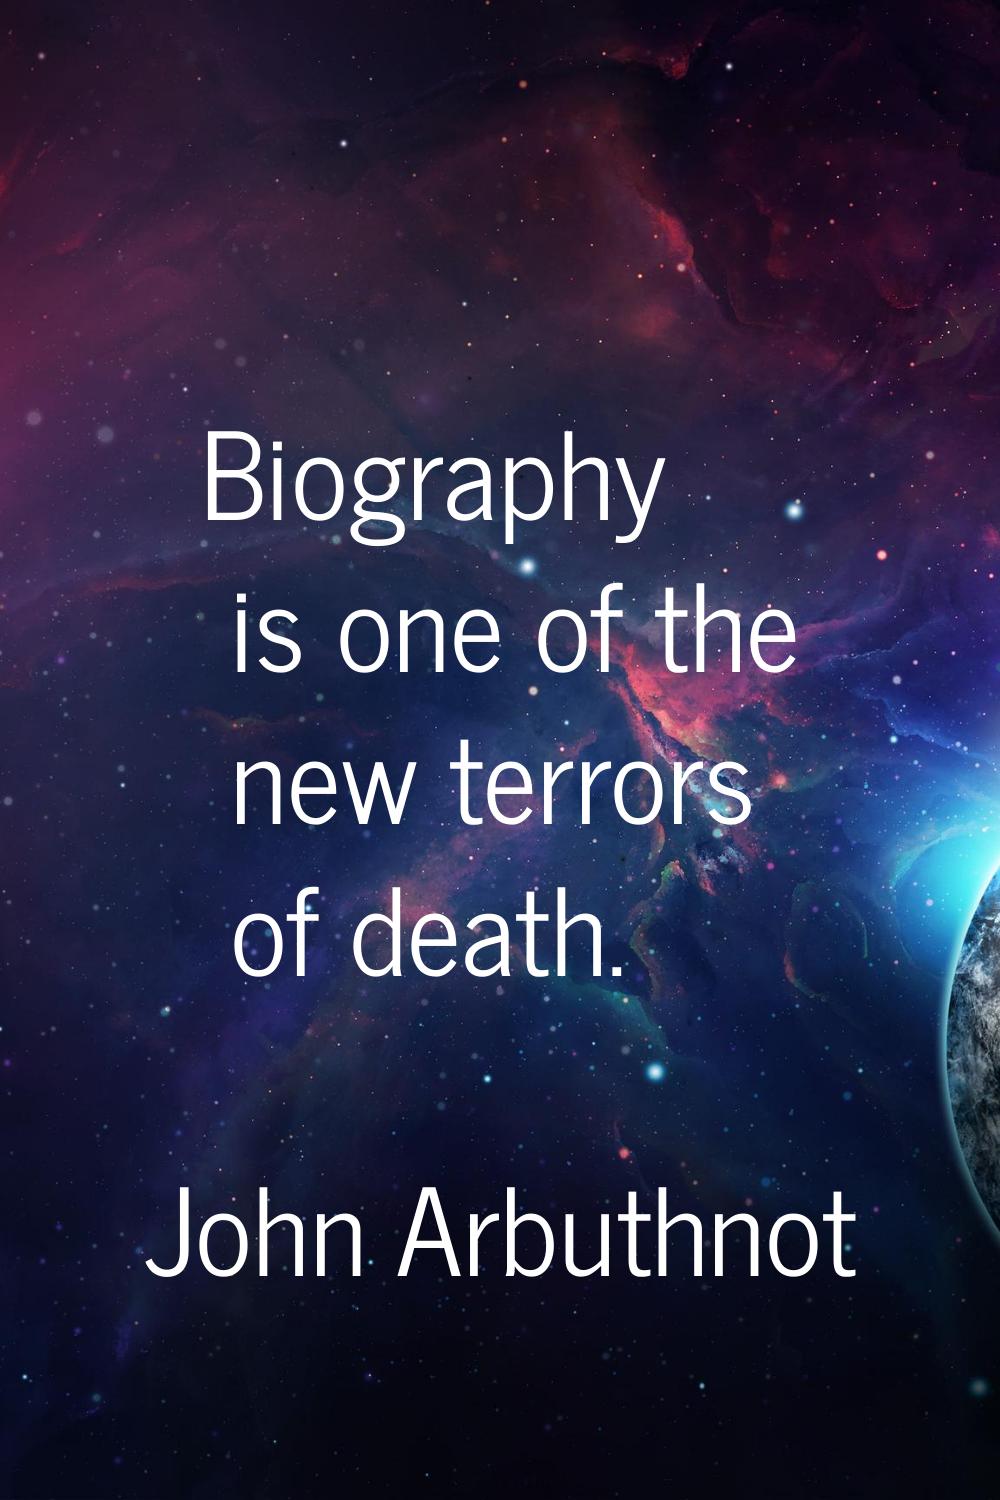 Biography is one of the new terrors of death.